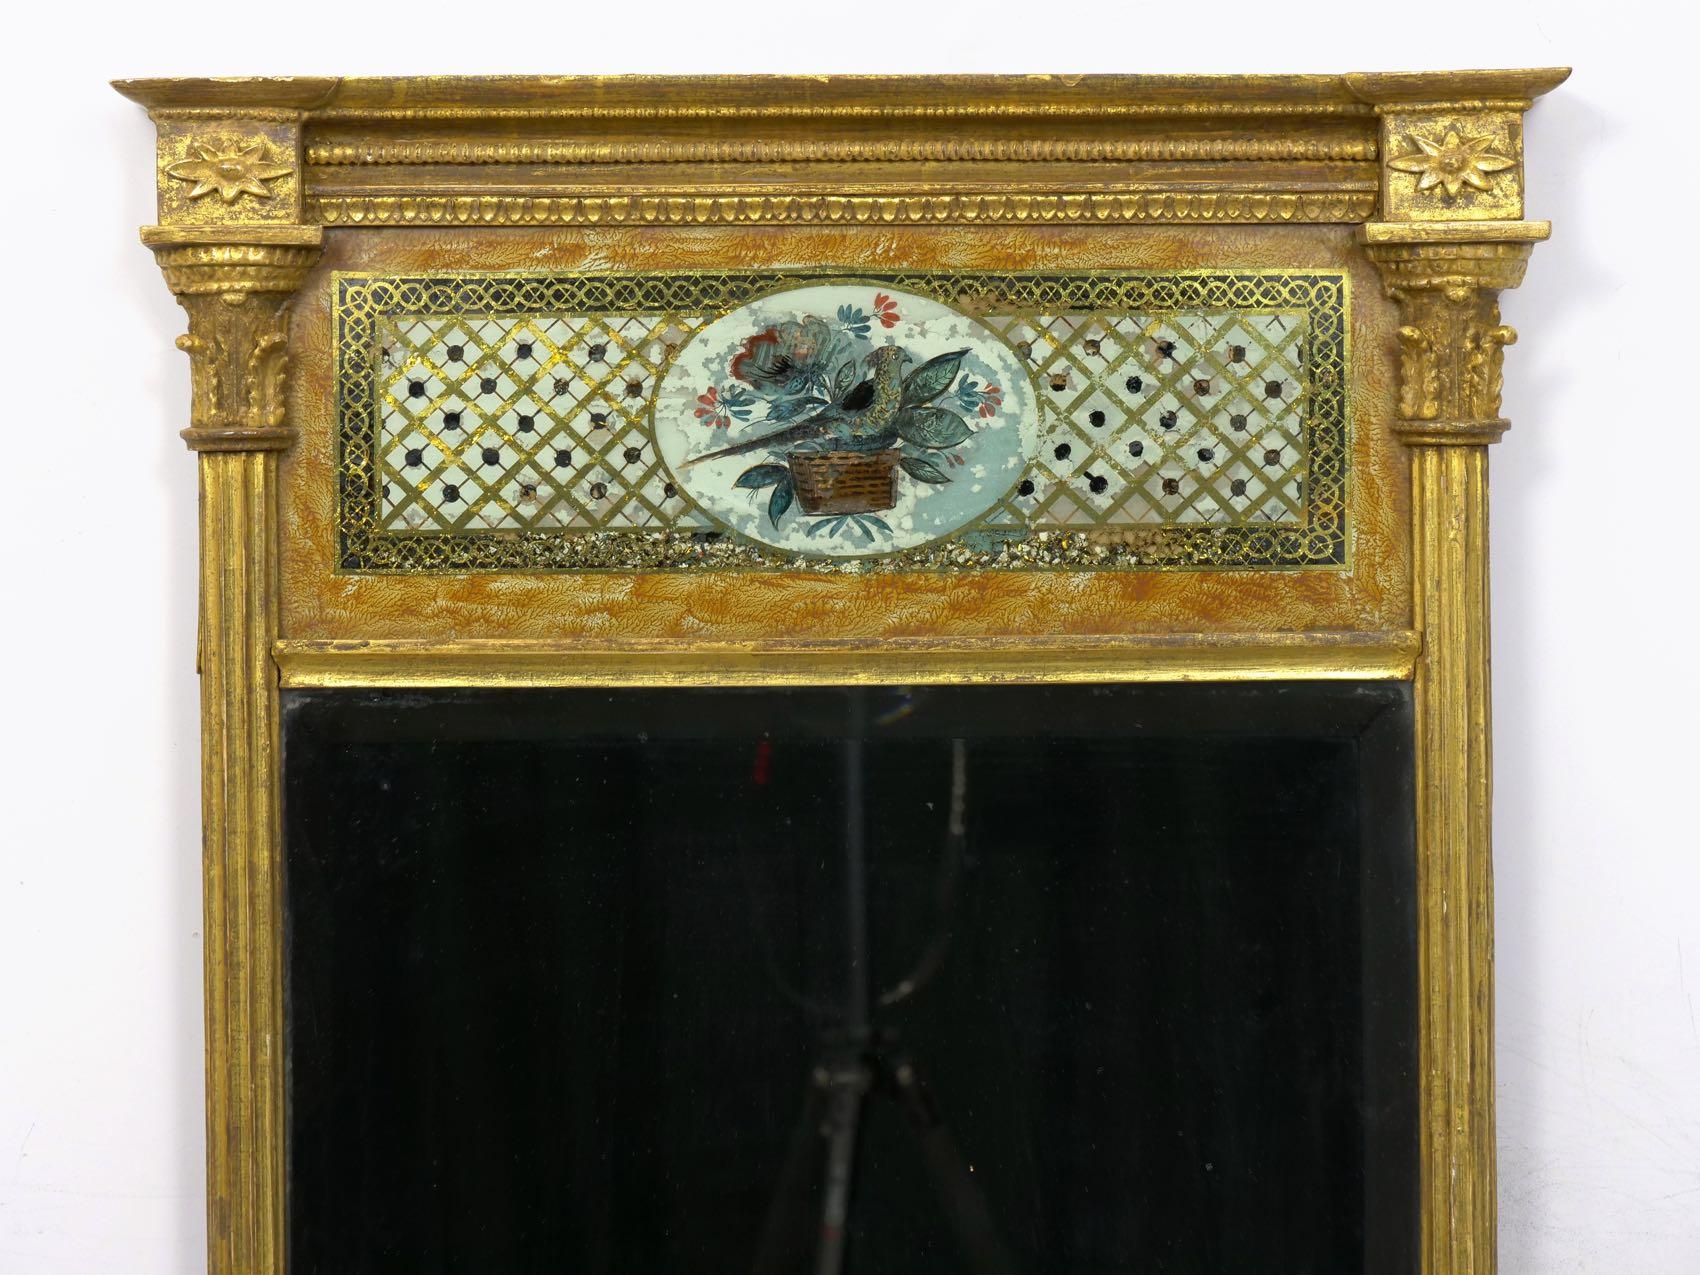 A powerful Federal period example, this pier mirror is a fine display of Neoclassicism in the first quarter of the 19th century. The tasteful decoration of the surfaces throughout is notable for its sheer variety and imaginative qualities. There is